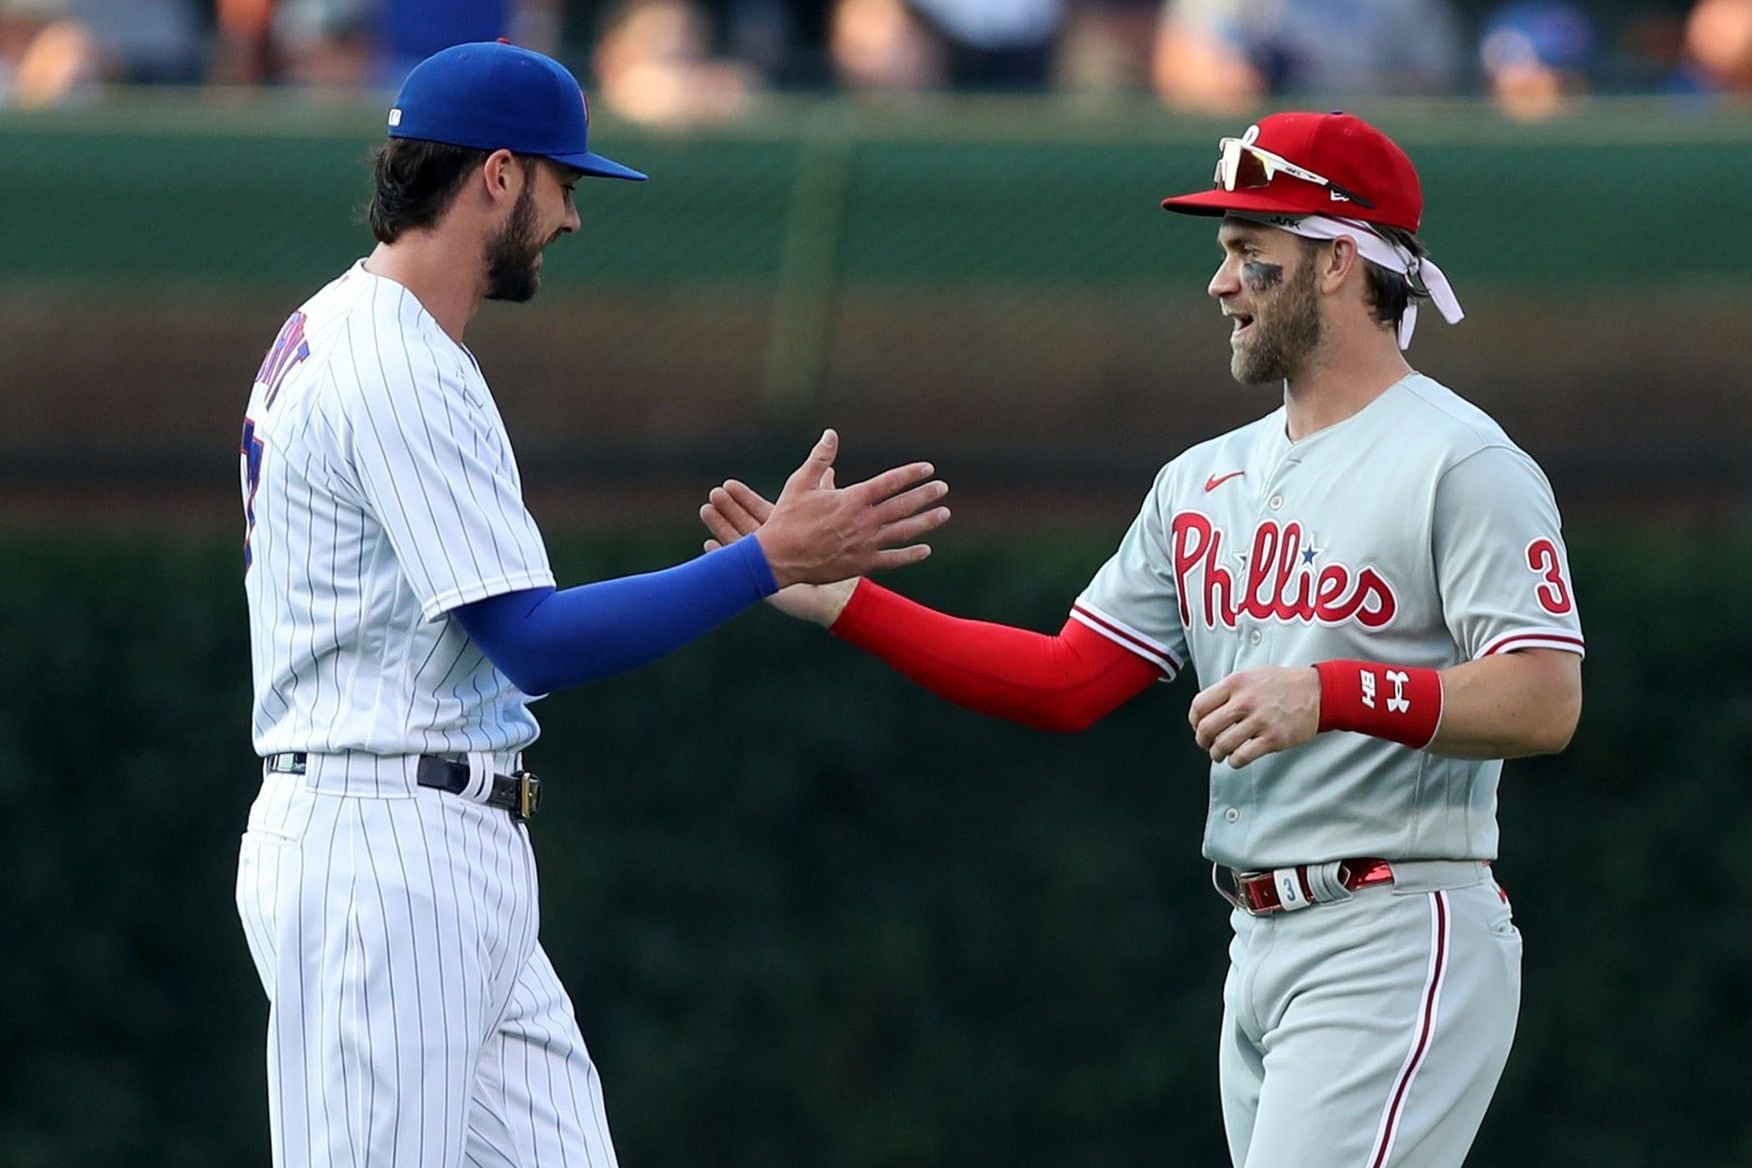 Bryce Harper used Kris Bryant's bat Monday, but don't count on the Phillies  trading for the Cubs star